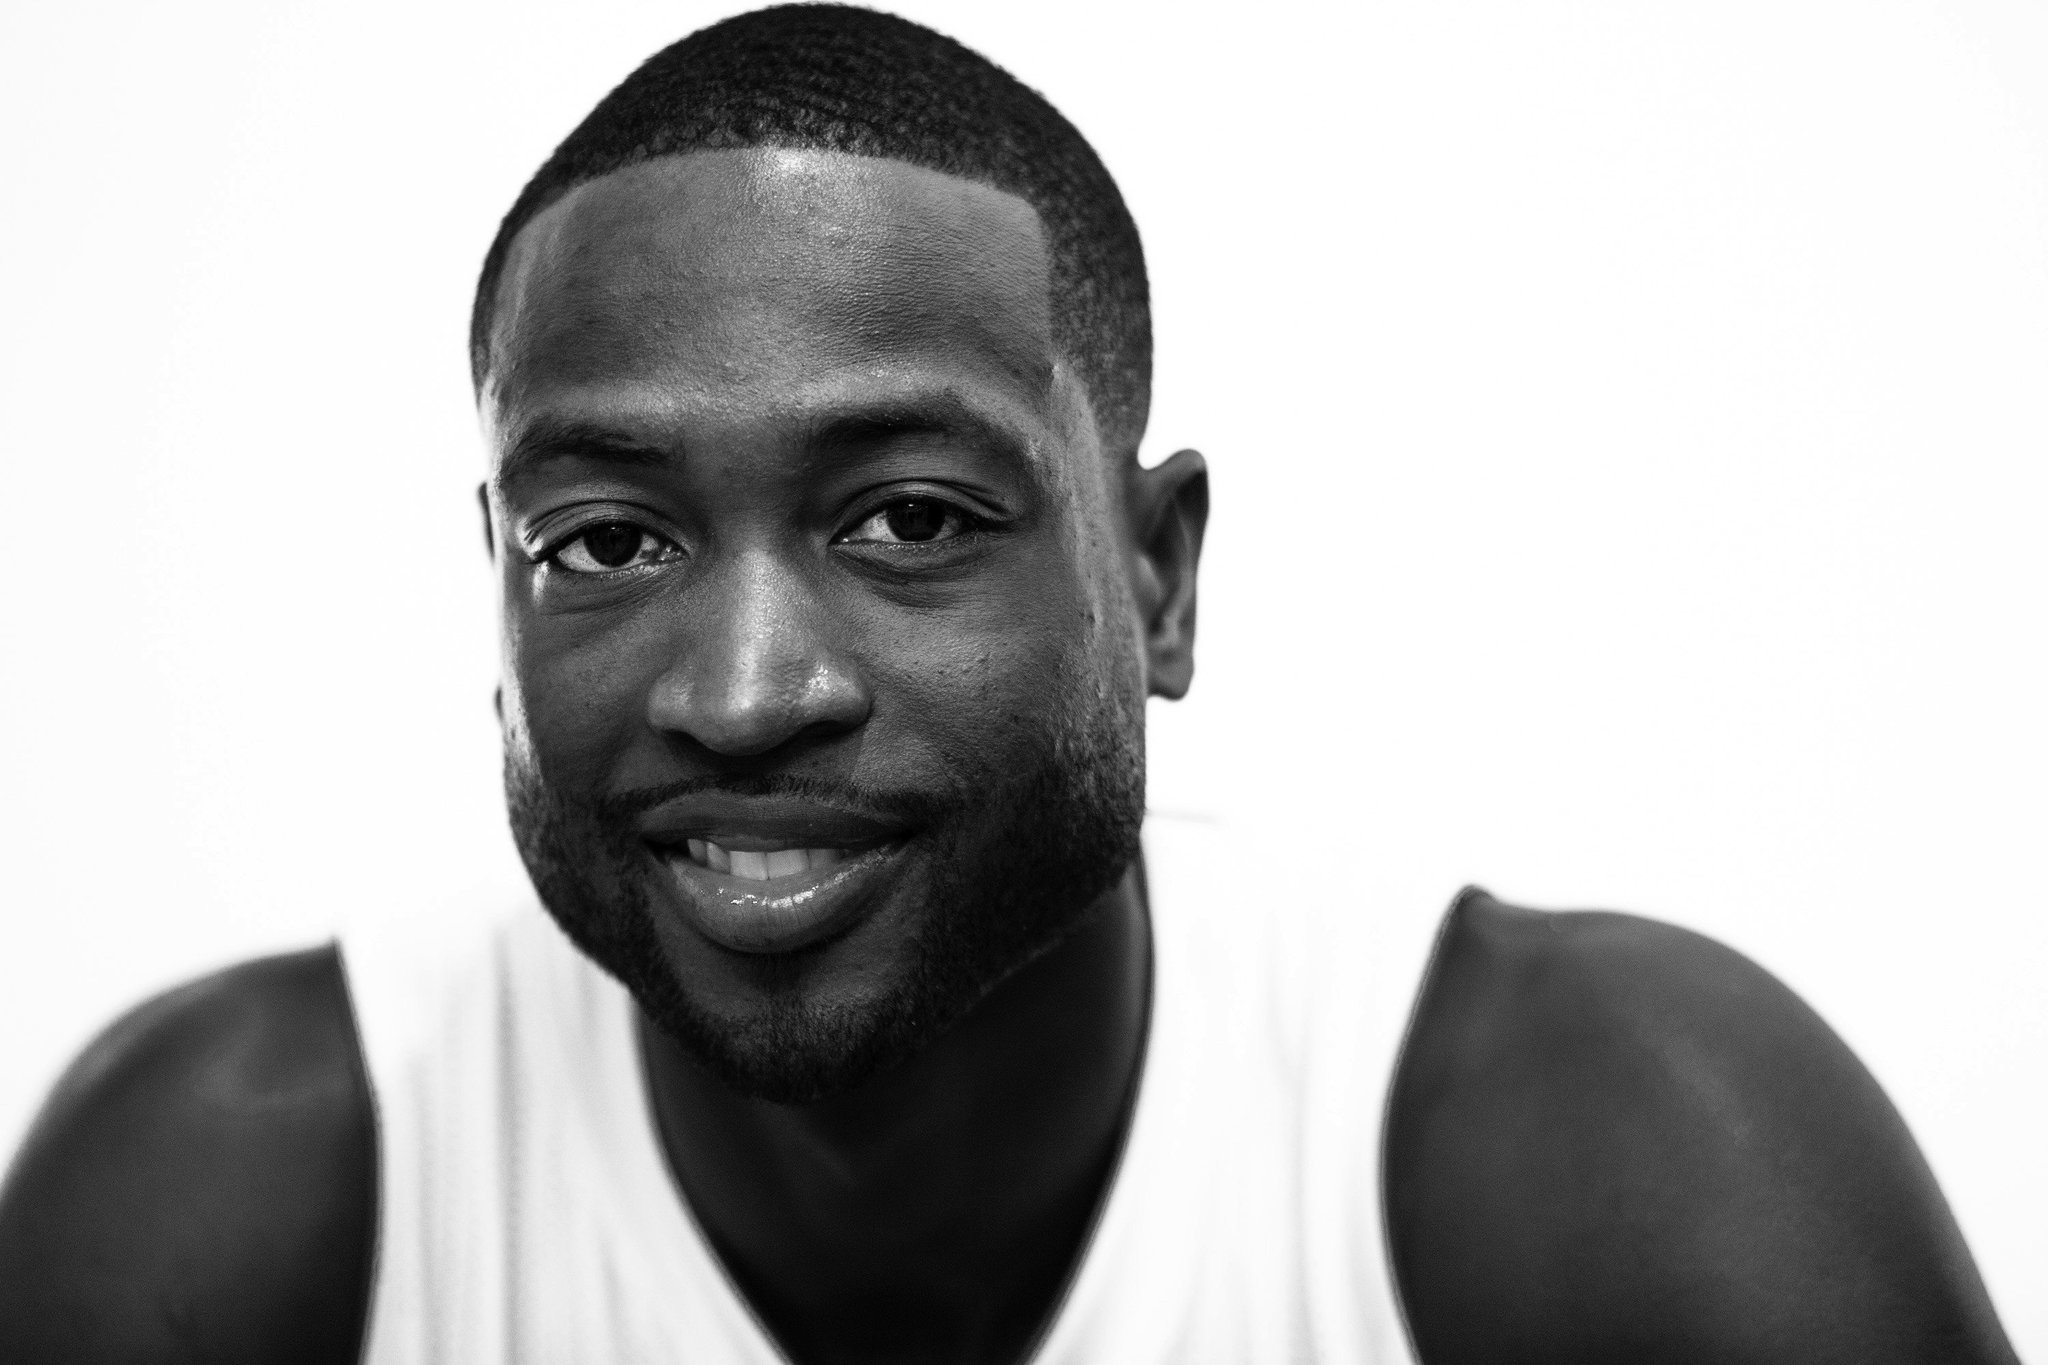 After vowing to give back, Dwyane Wade loses cousin to gun violence - Chicago Tribune2048 x 1365